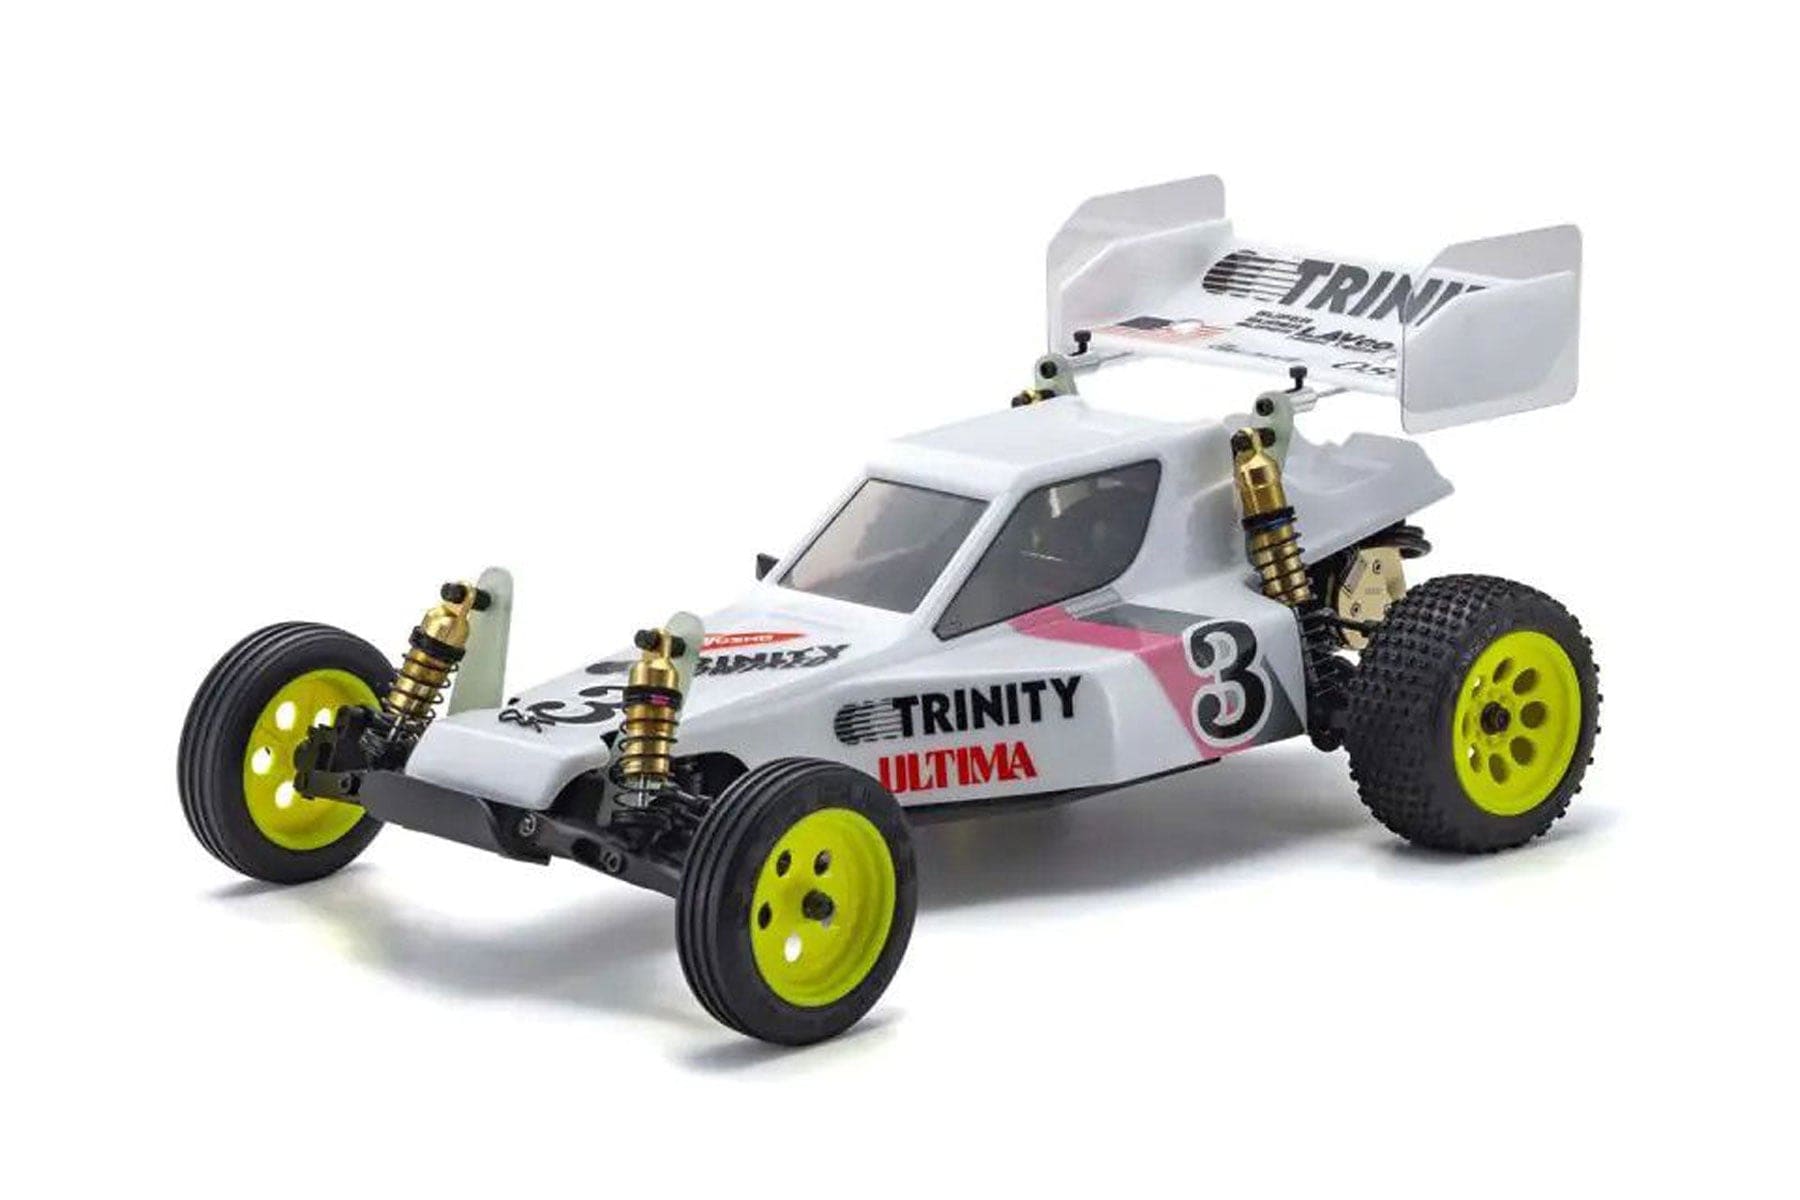 Kyosho Ultima '87 JJ World Championship Replica 1/10 Scale 2WD Off-Road Buggy - KIT KYO30642